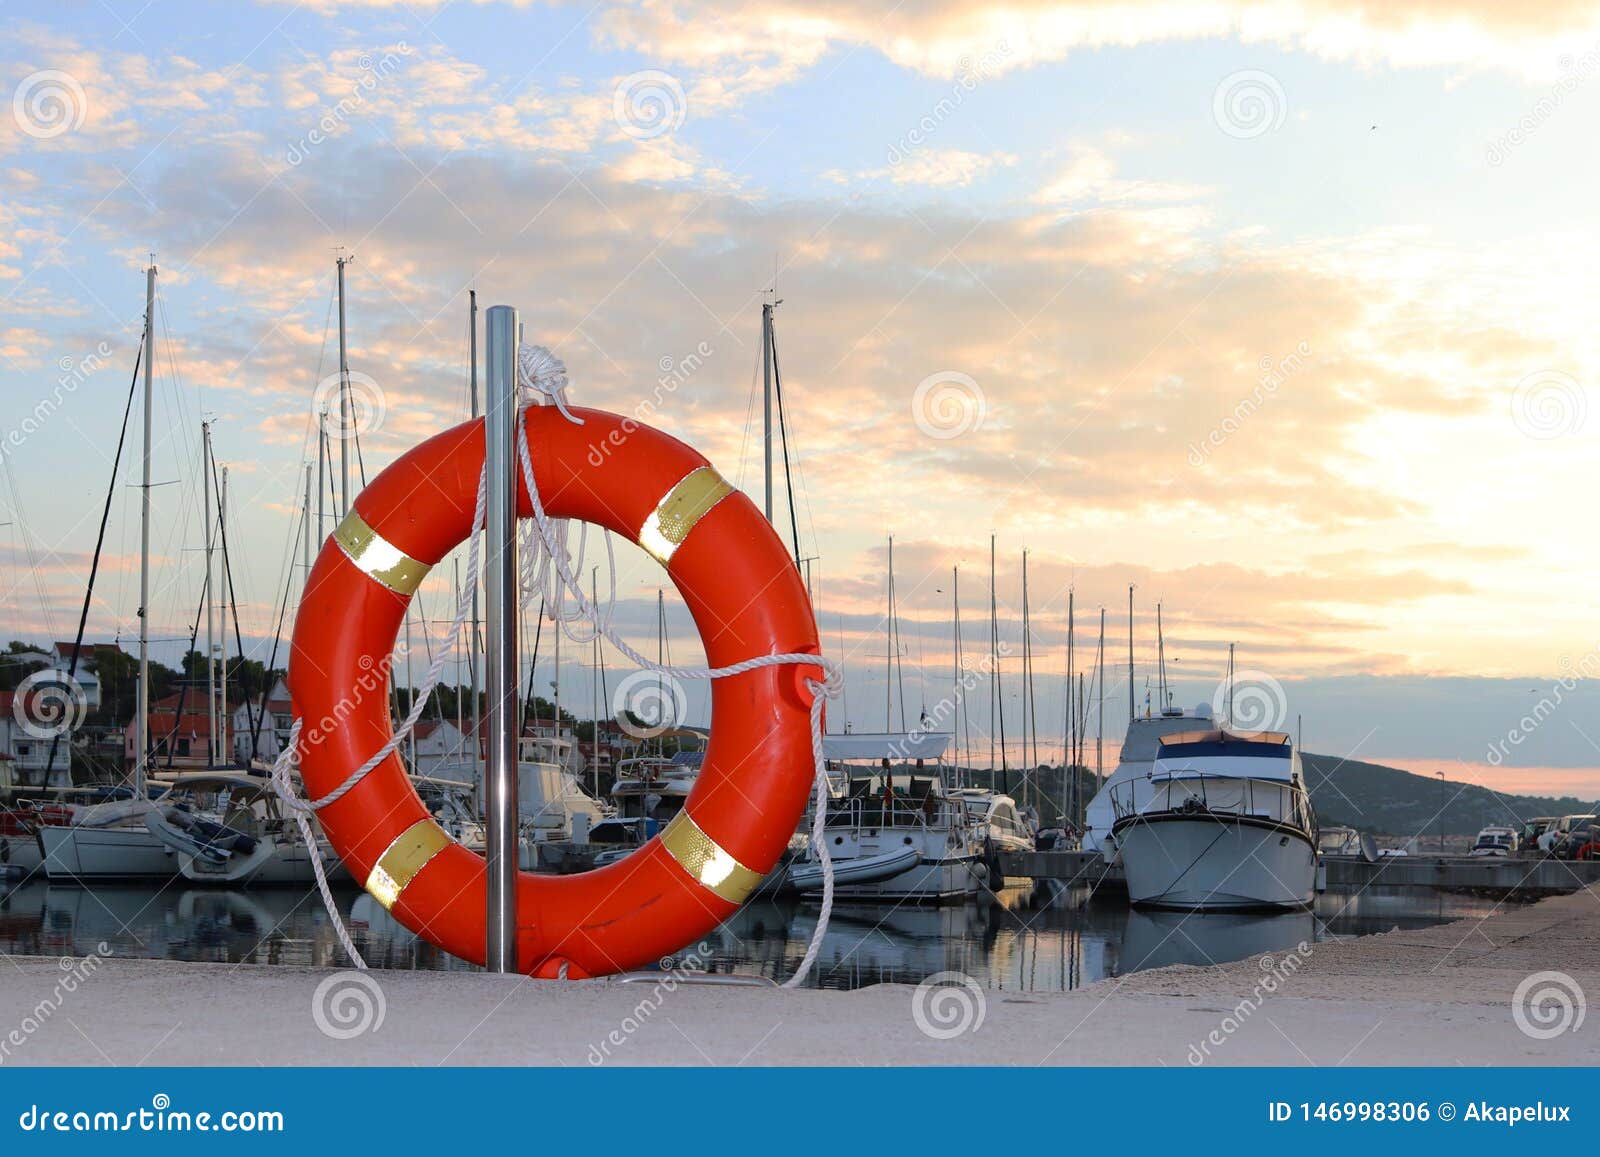 Orange Life Ring on the Pier in the Croatian Marina Against the ...